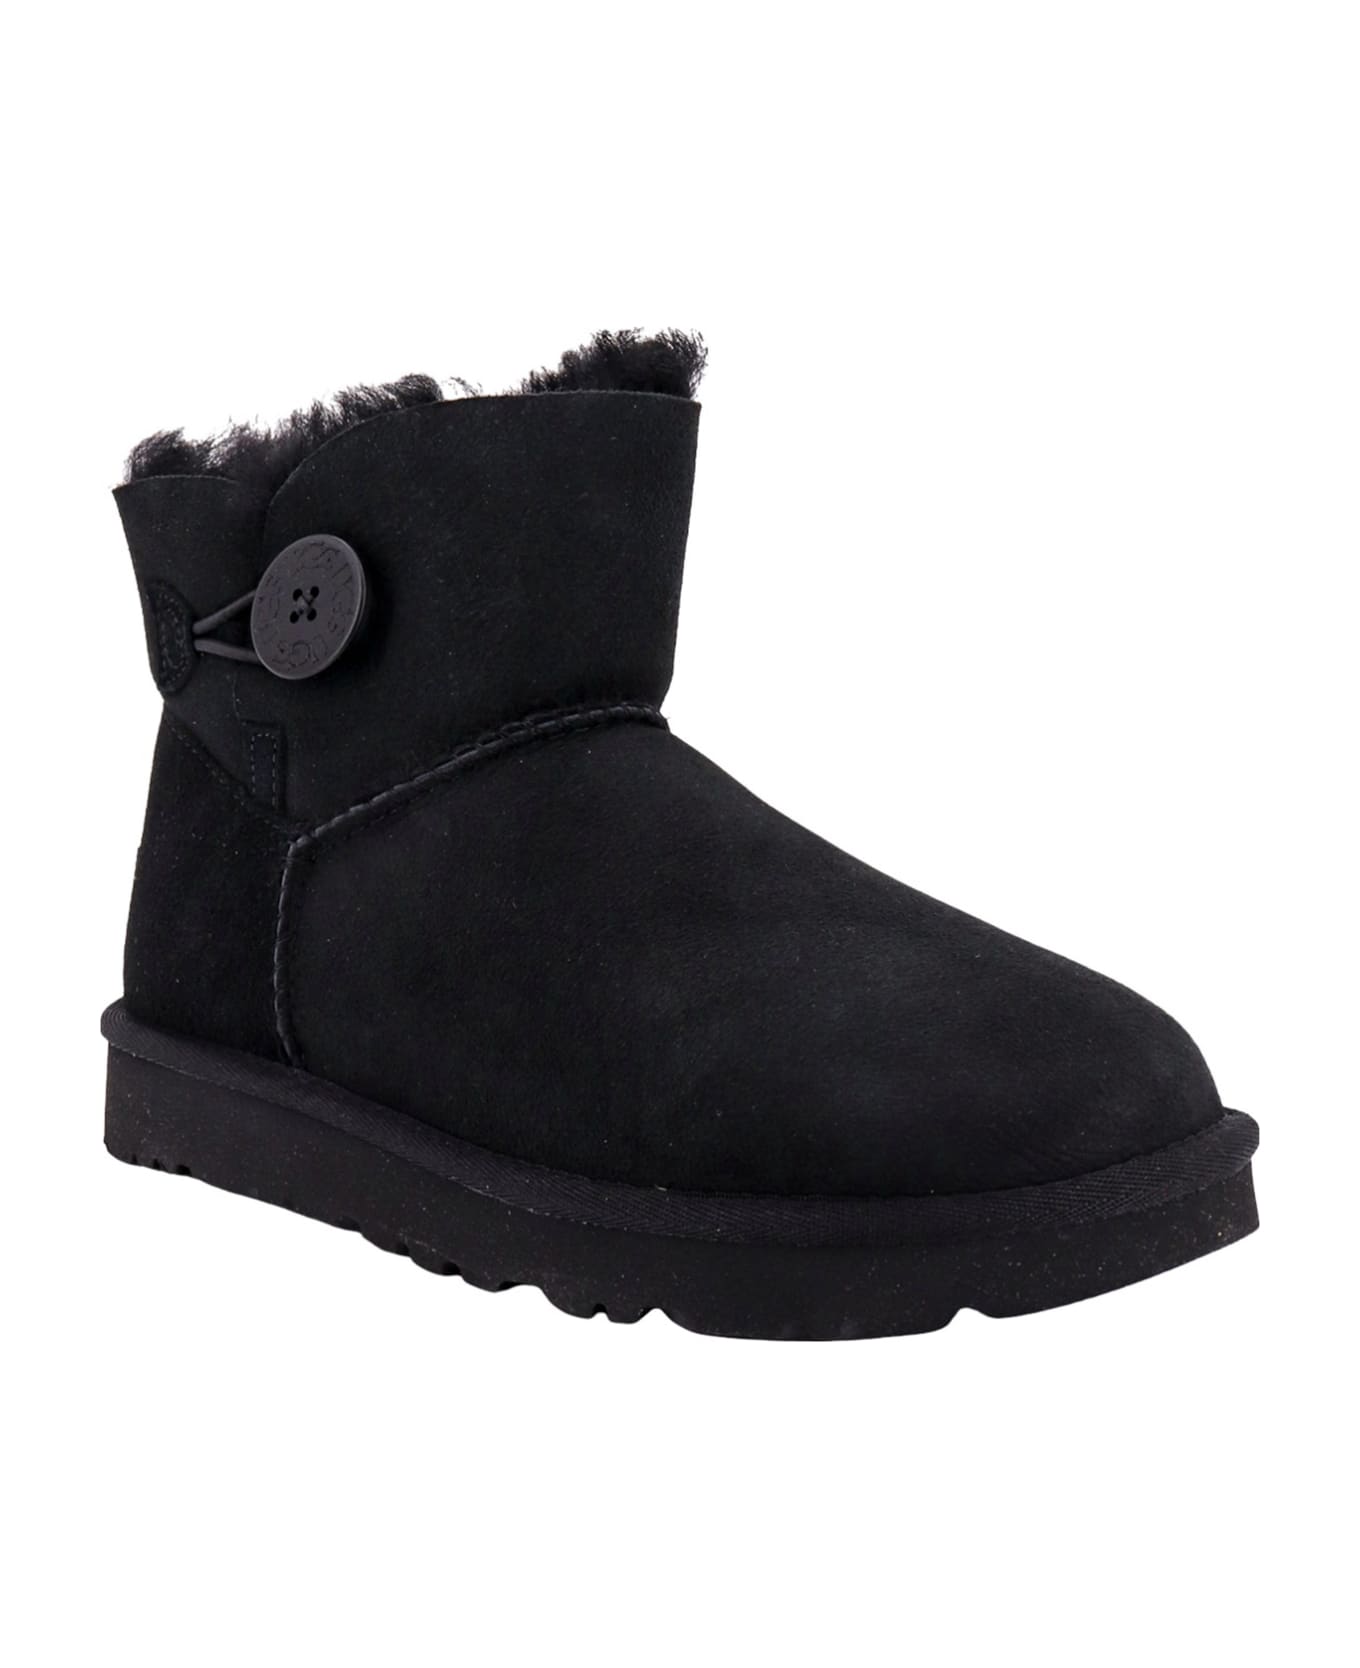 UGG Mini Baley Button Ankle Boots - Black ブーツ